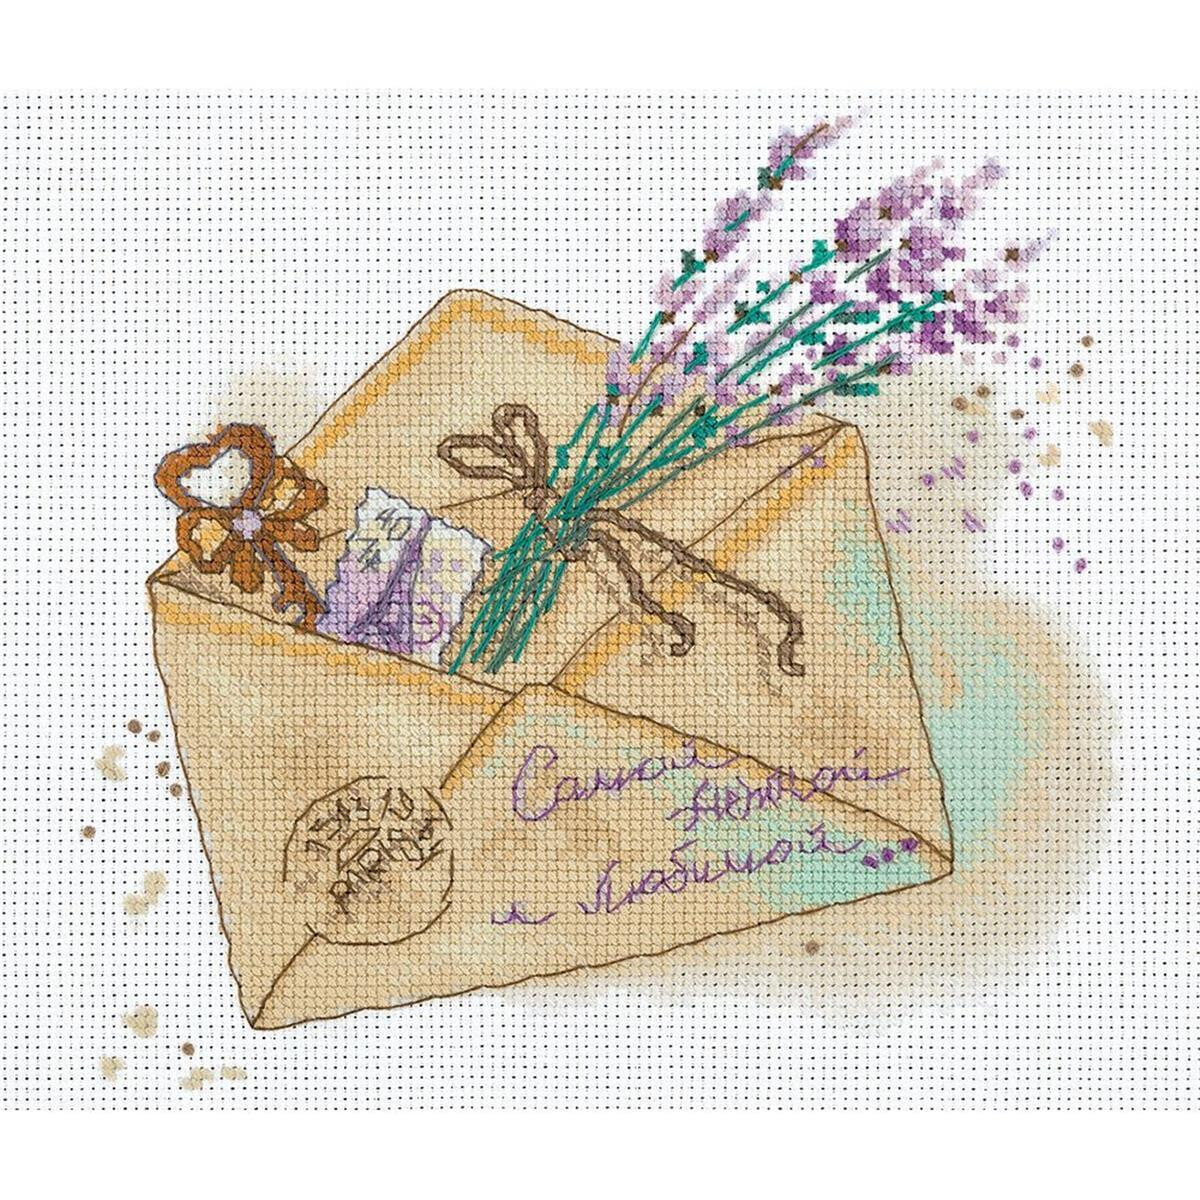 Panna counted cross stitch kit "Letter"...